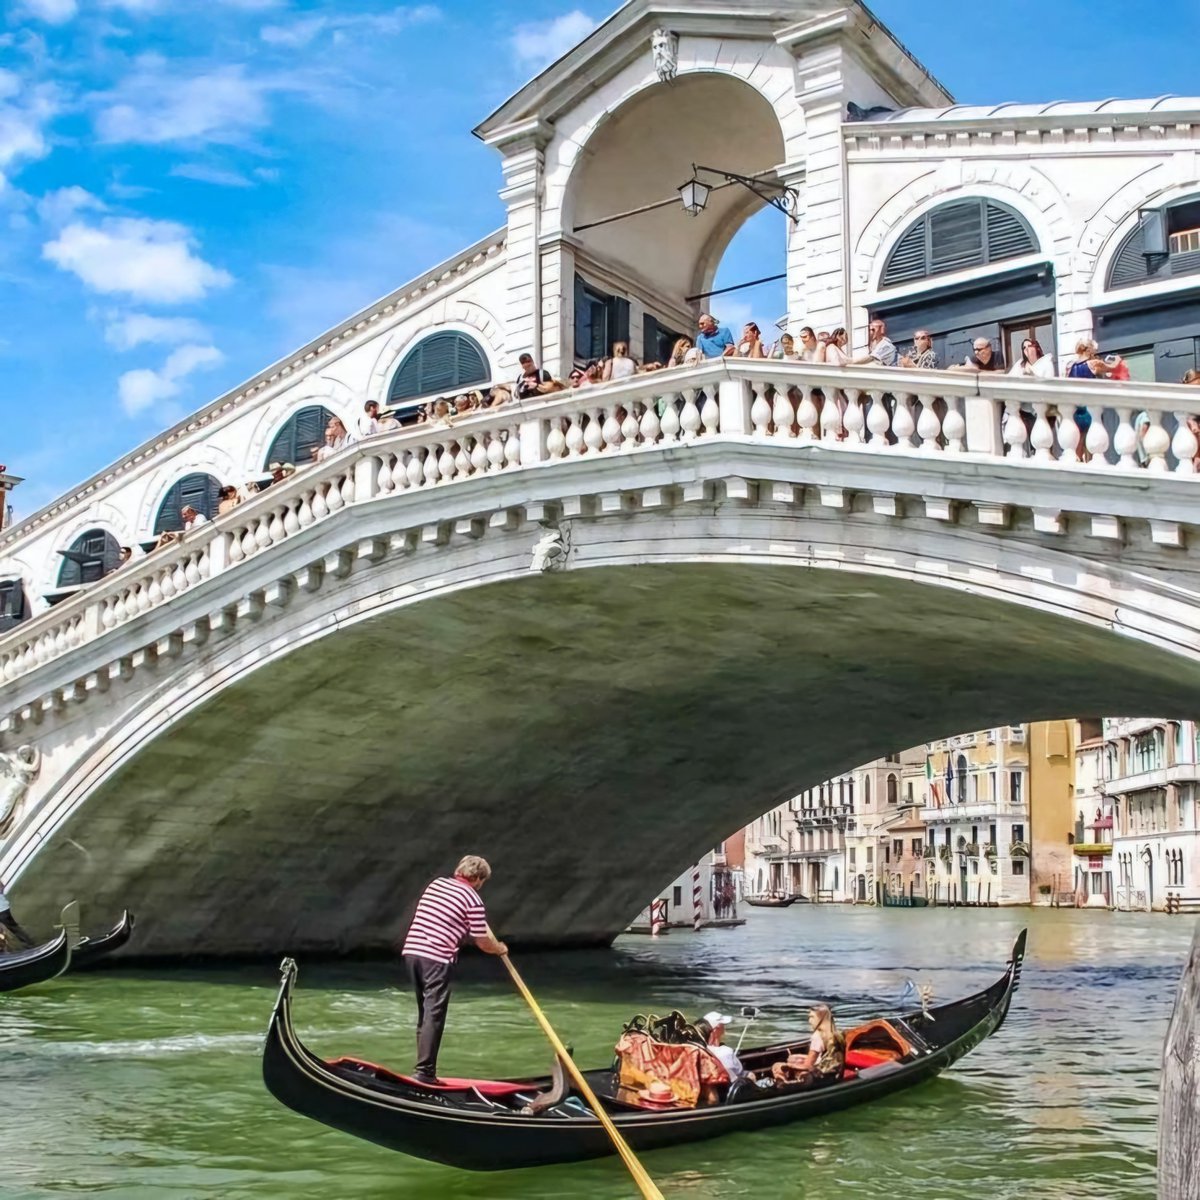 13. Rialto Bridge - Venice, Italy

The oldest of the four bridges that span the Grand Canal in Venice, the Rialto Bridge’s current iteration was completed in 1591. It is a bustling pedestrian bridge and a historic piece of Renaissance architecture.